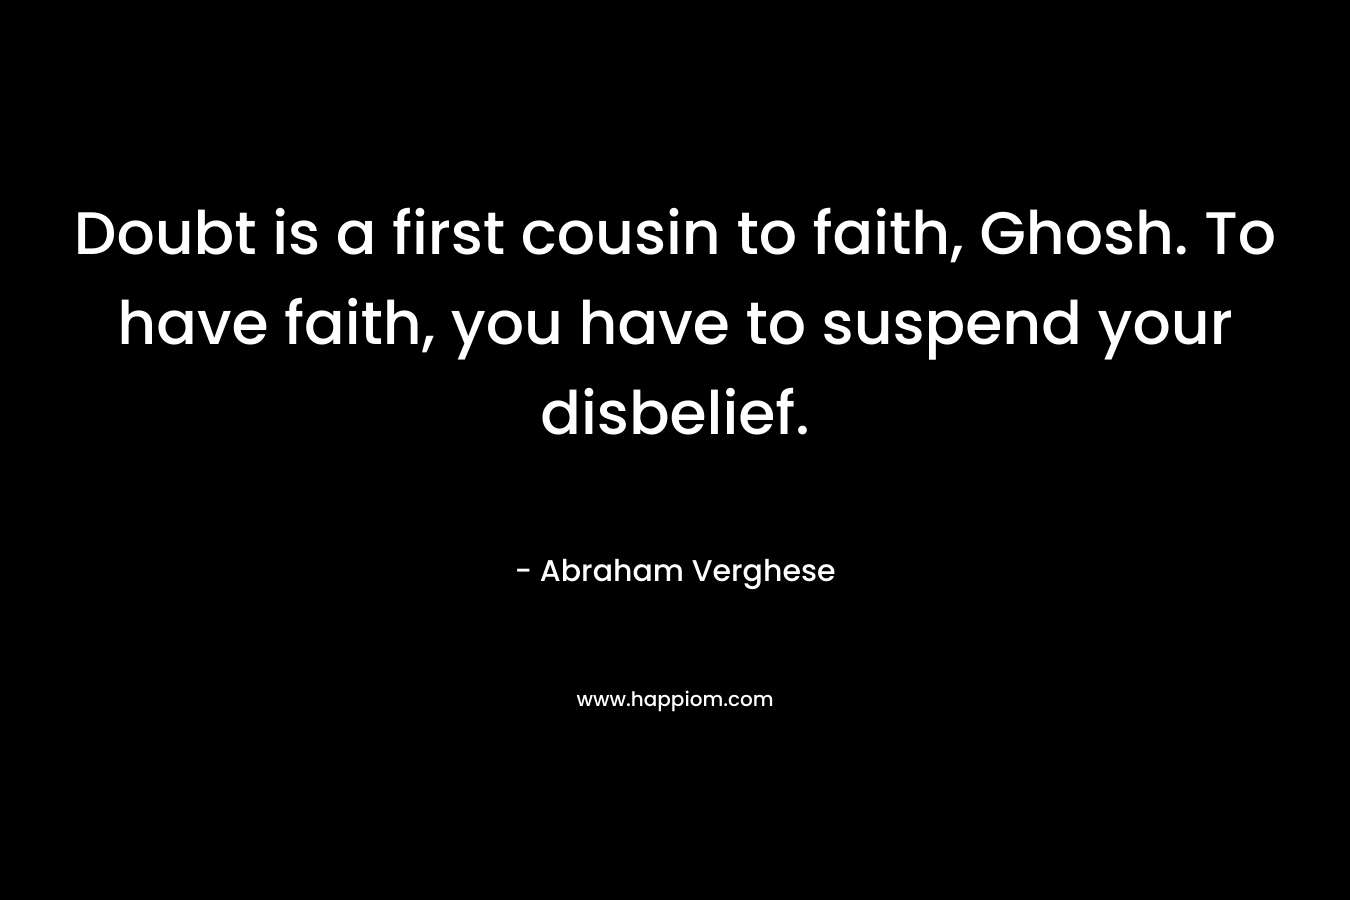 Doubt is a first cousin to faith, Ghosh. To have faith, you have to suspend your disbelief. – Abraham Verghese